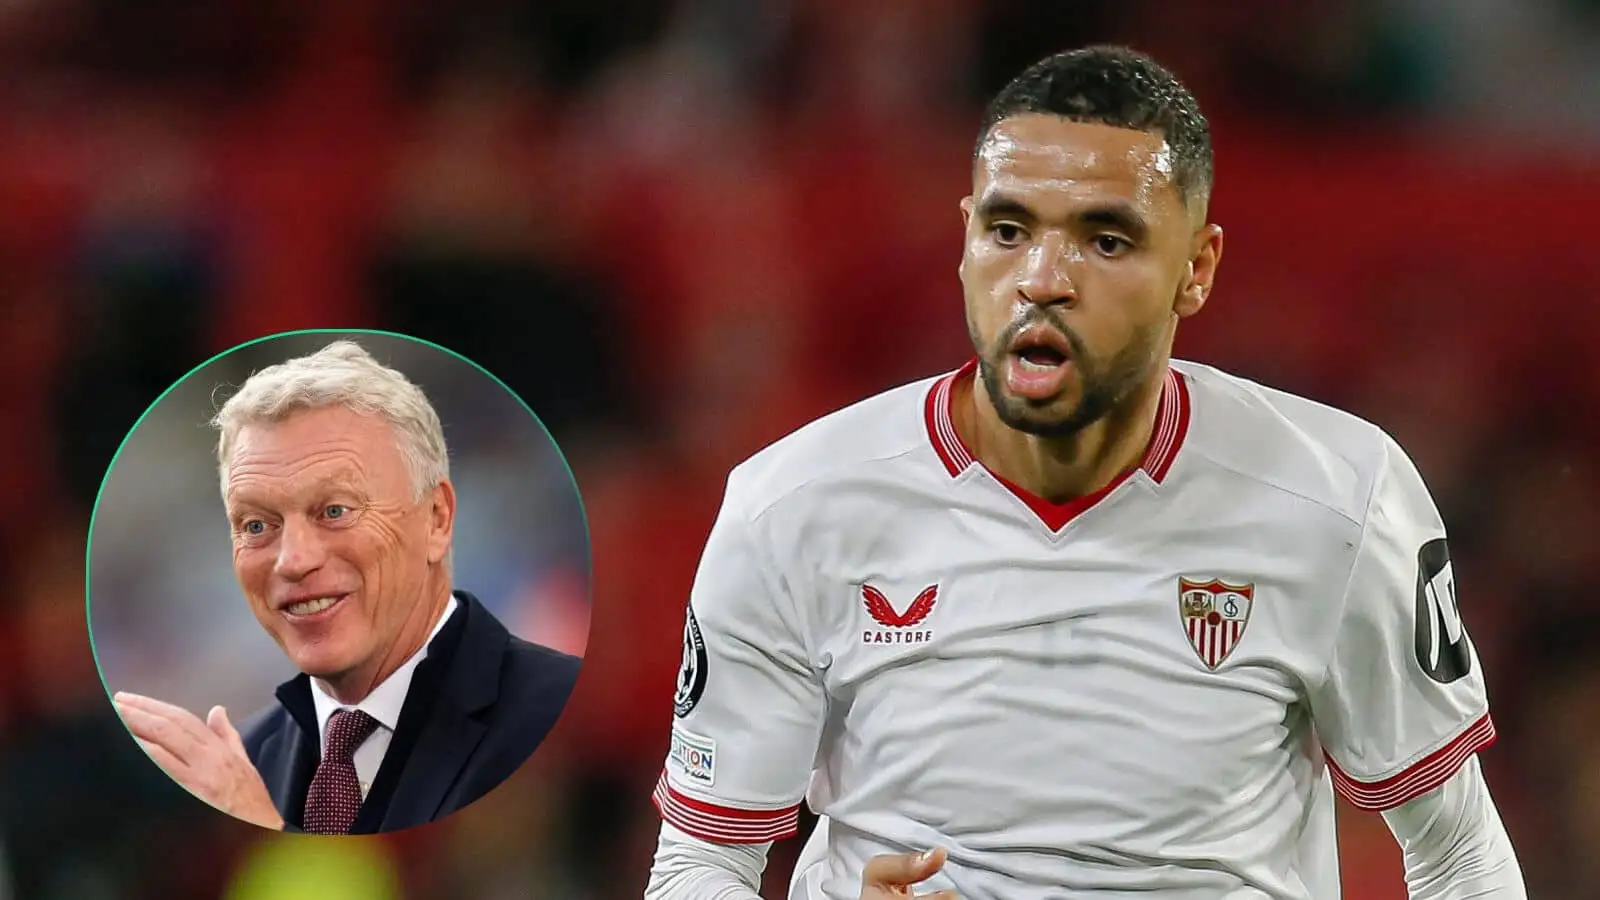 Sevilla striker Youssef En-Nesyri is being linked with a fresh move to West Ham with David Moyes still an admirer